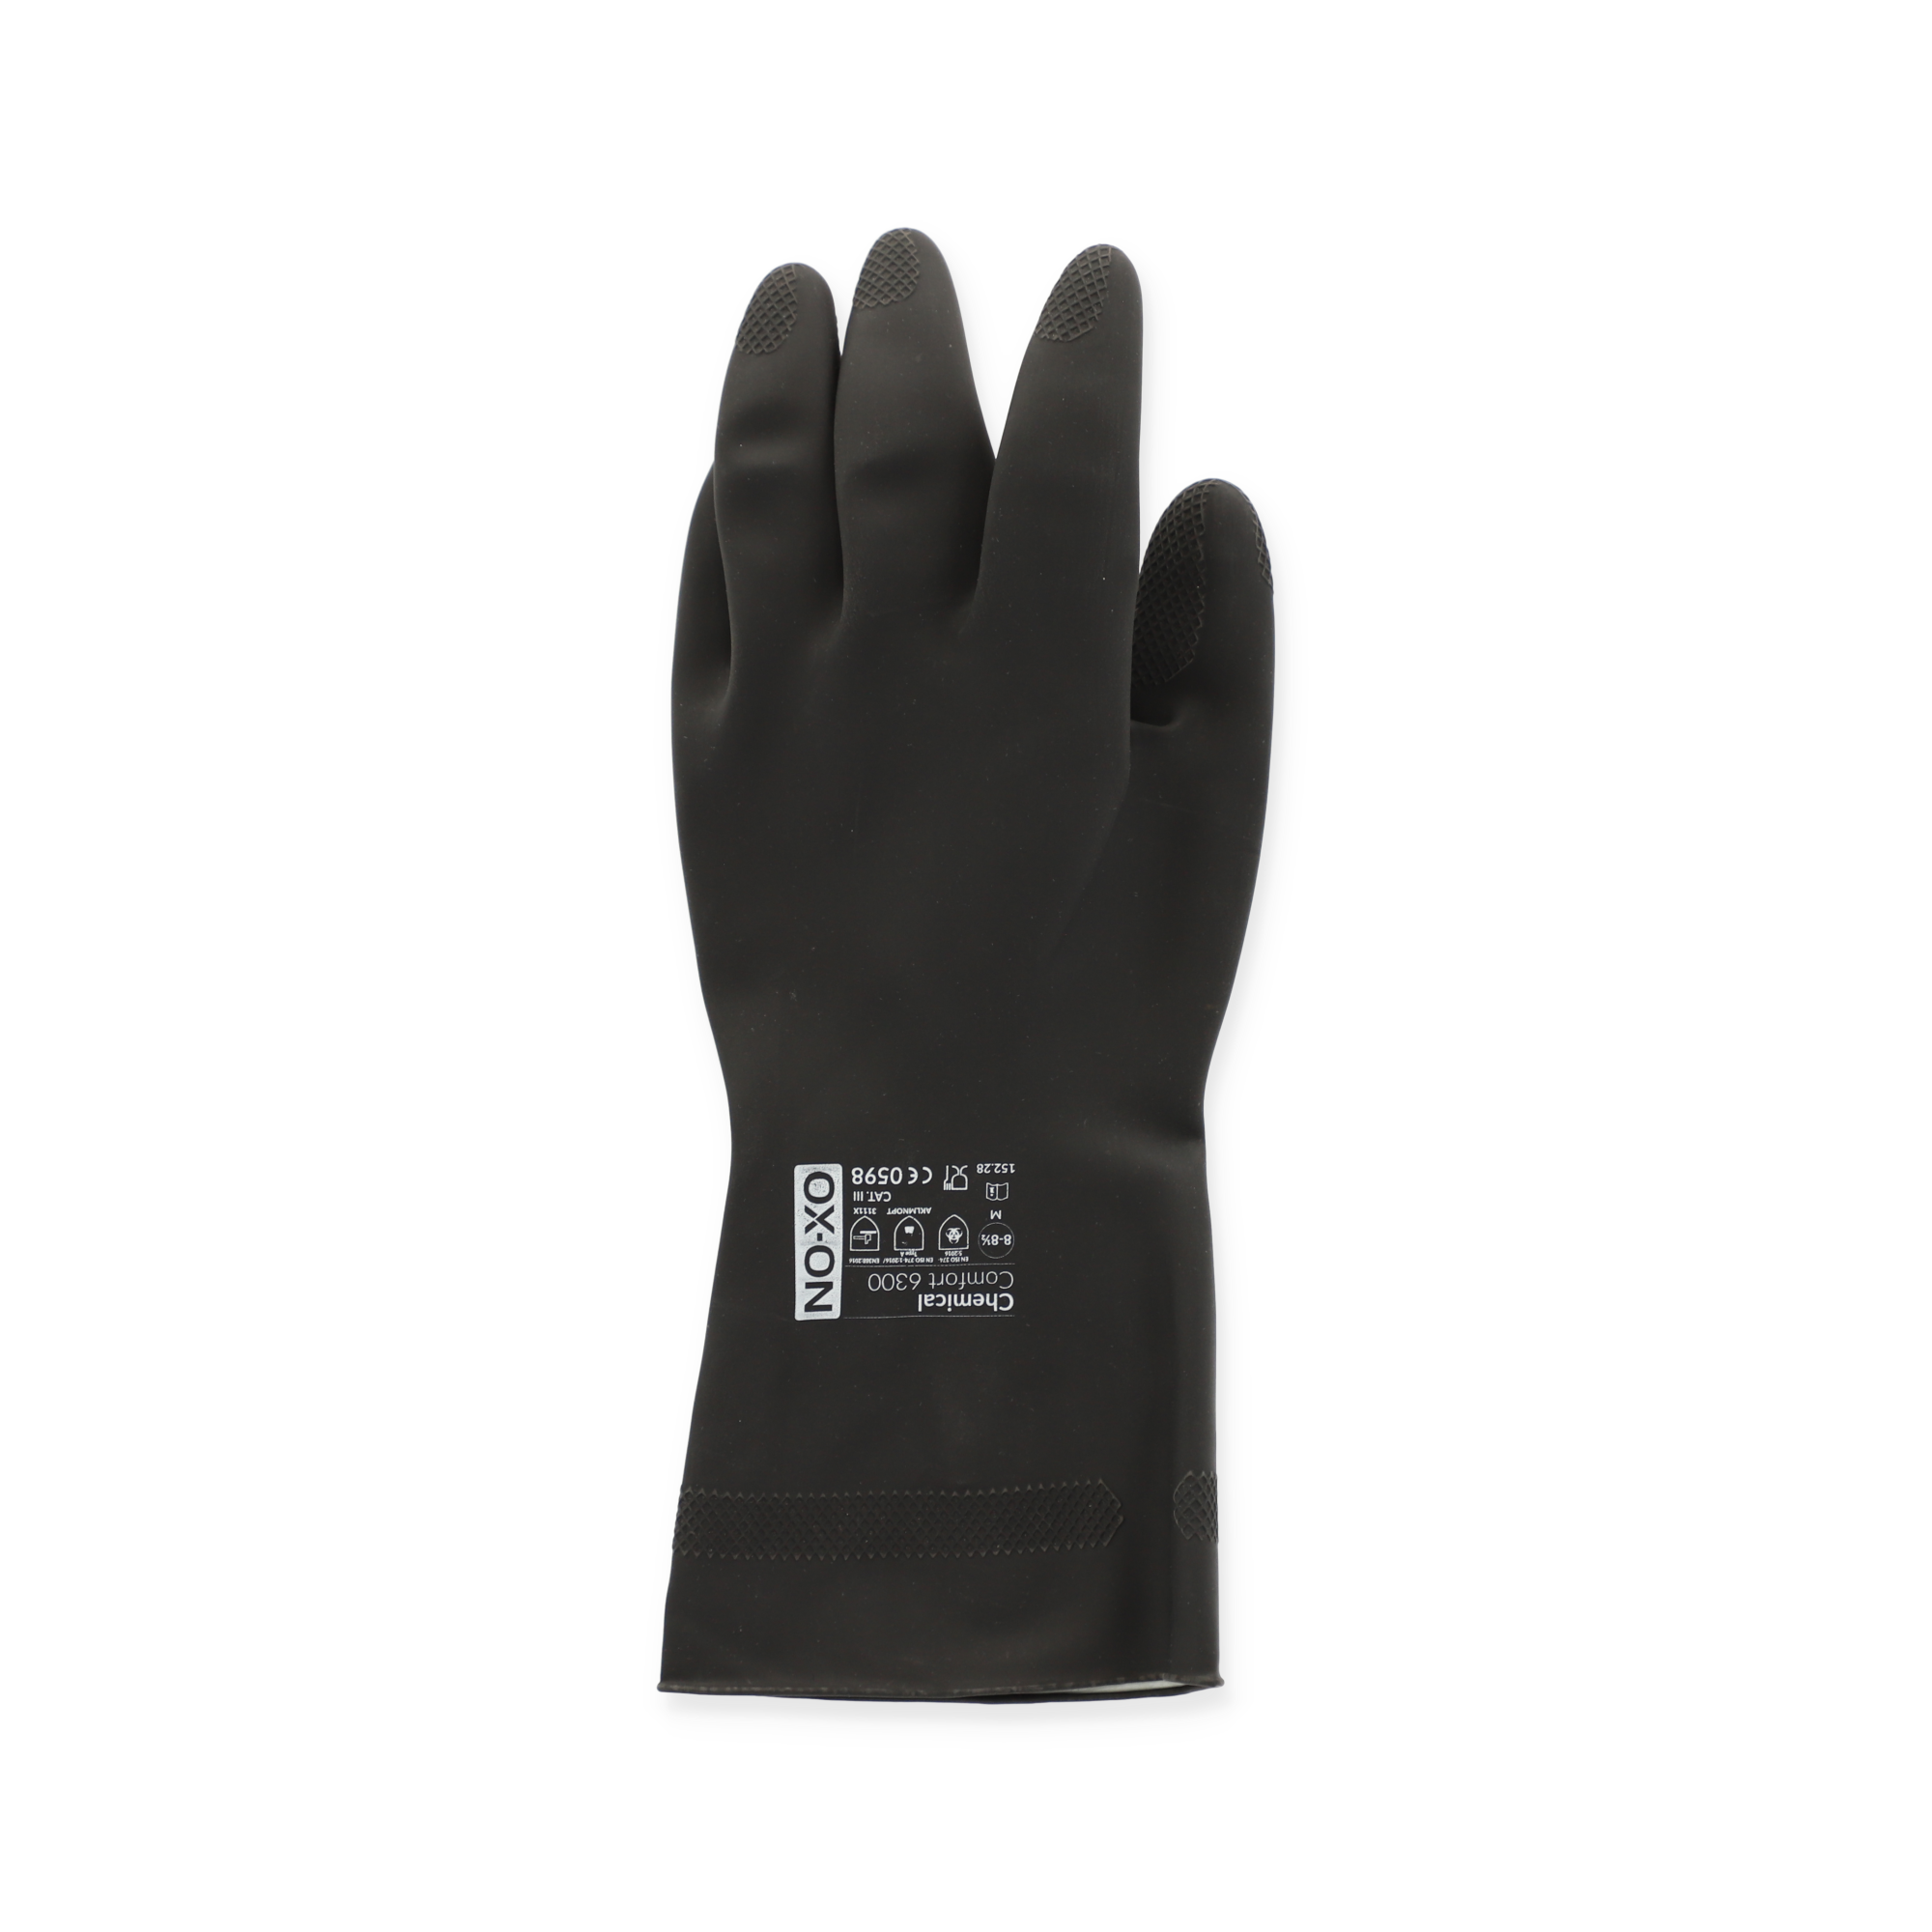 Handschuhe 'Chemical Comfort 6300' schwarz Gr. 8 + product picture